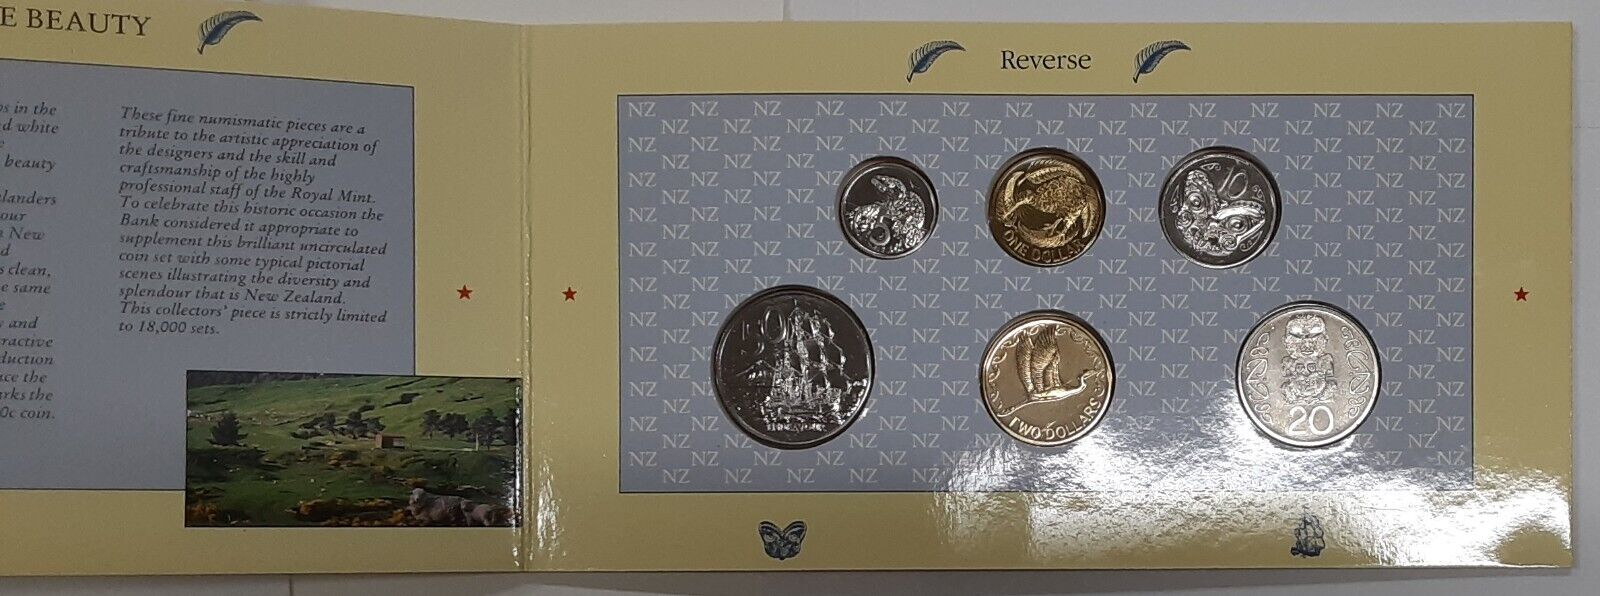 1990 Reserve Bank of New Zealand 6 Coin Set BU in OGP